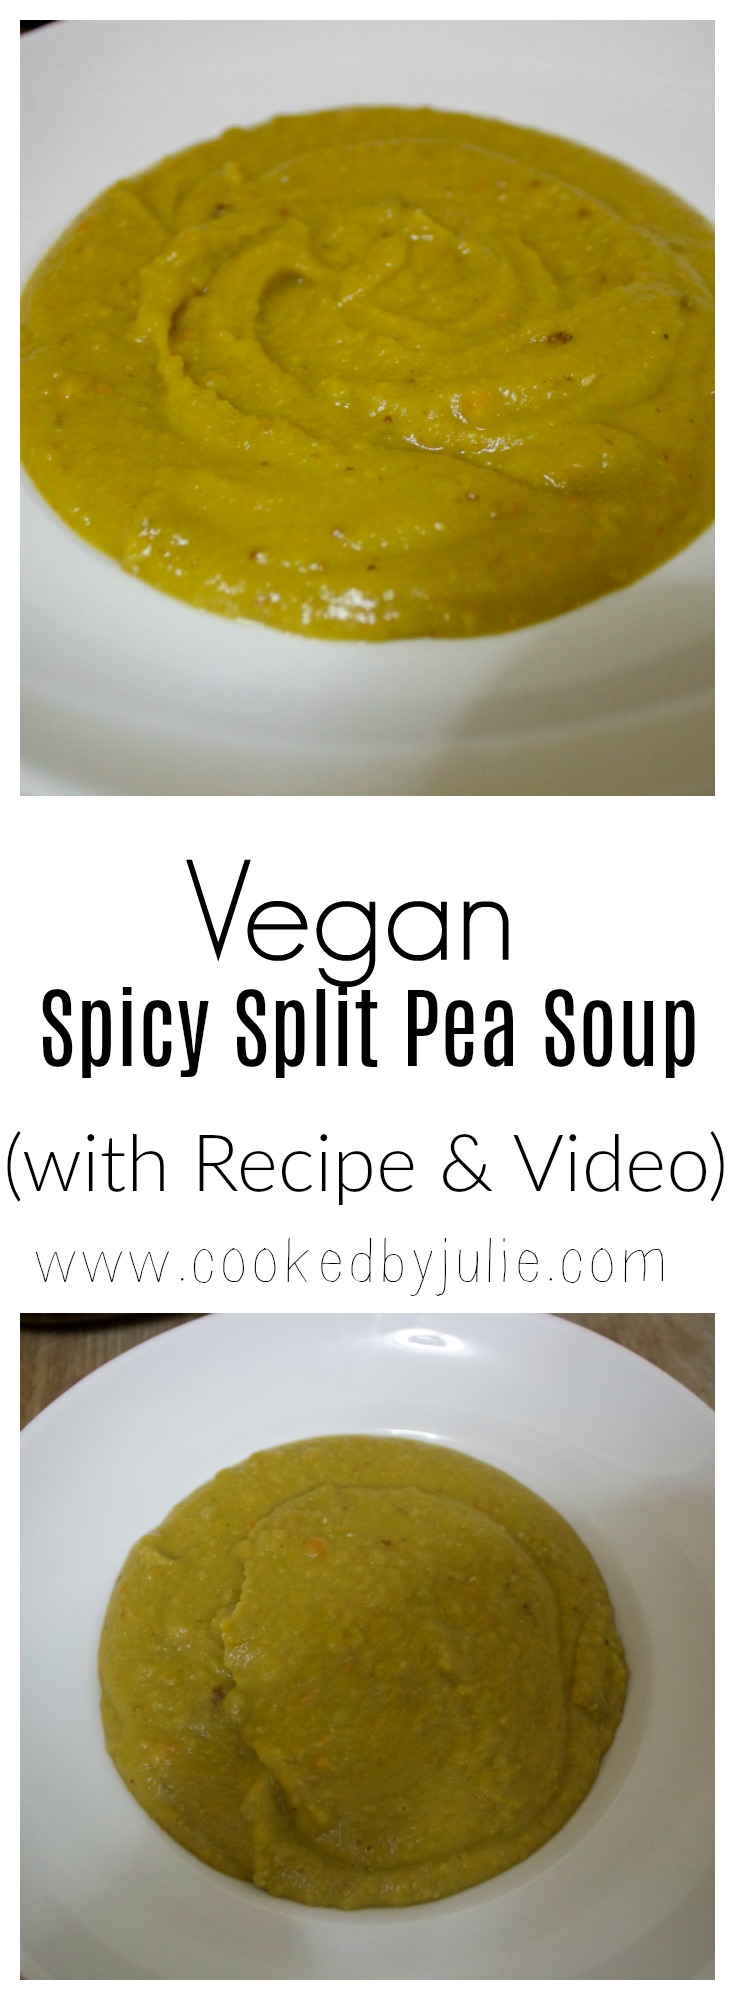 Vegan Spicy Split Pea Soup Recipe by Cooked By Julie